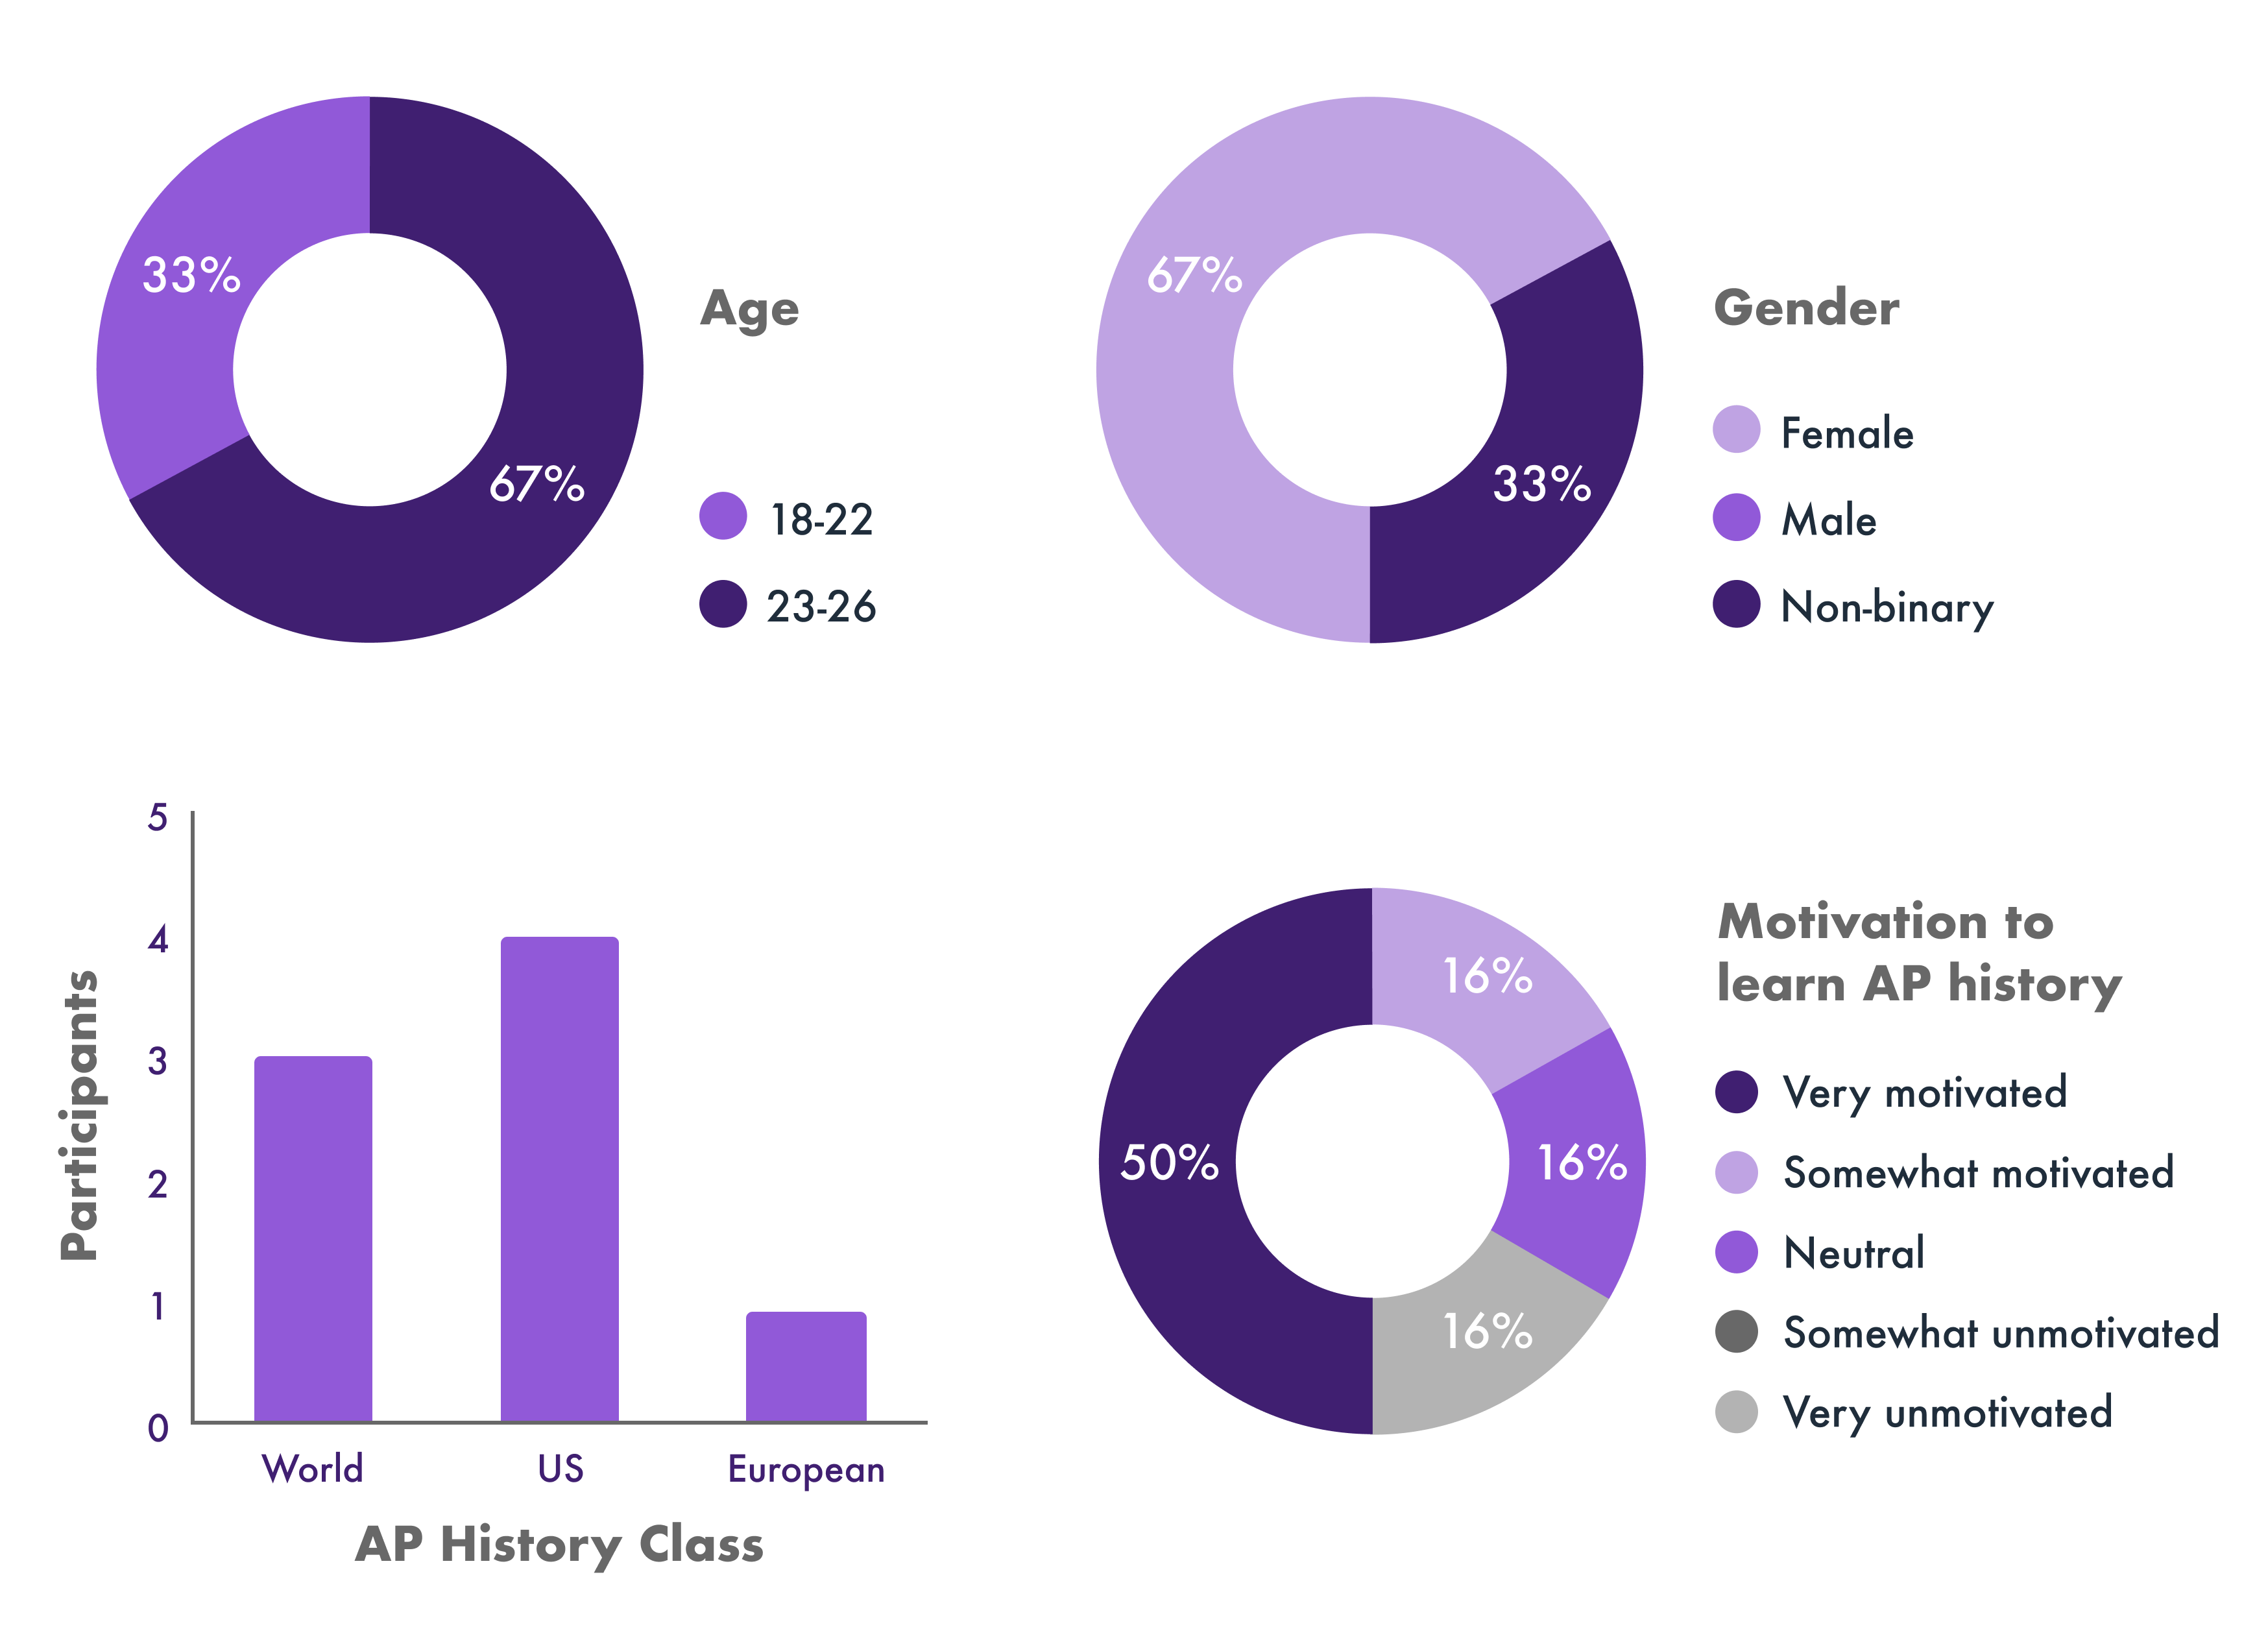 67% of our participants were aged 23-26, and 33% were 18-22; 67% were female, and 33% were nonbinary; 3 had taken AP World History, 4 has taken AP US History, and 1 had taken AP European History; 50% rated themselves as 'very motivated' to learn AP history, 16% rated 'somewhat motivated', 16% rated 'neutral', and 16% rated 'very unmotivated'